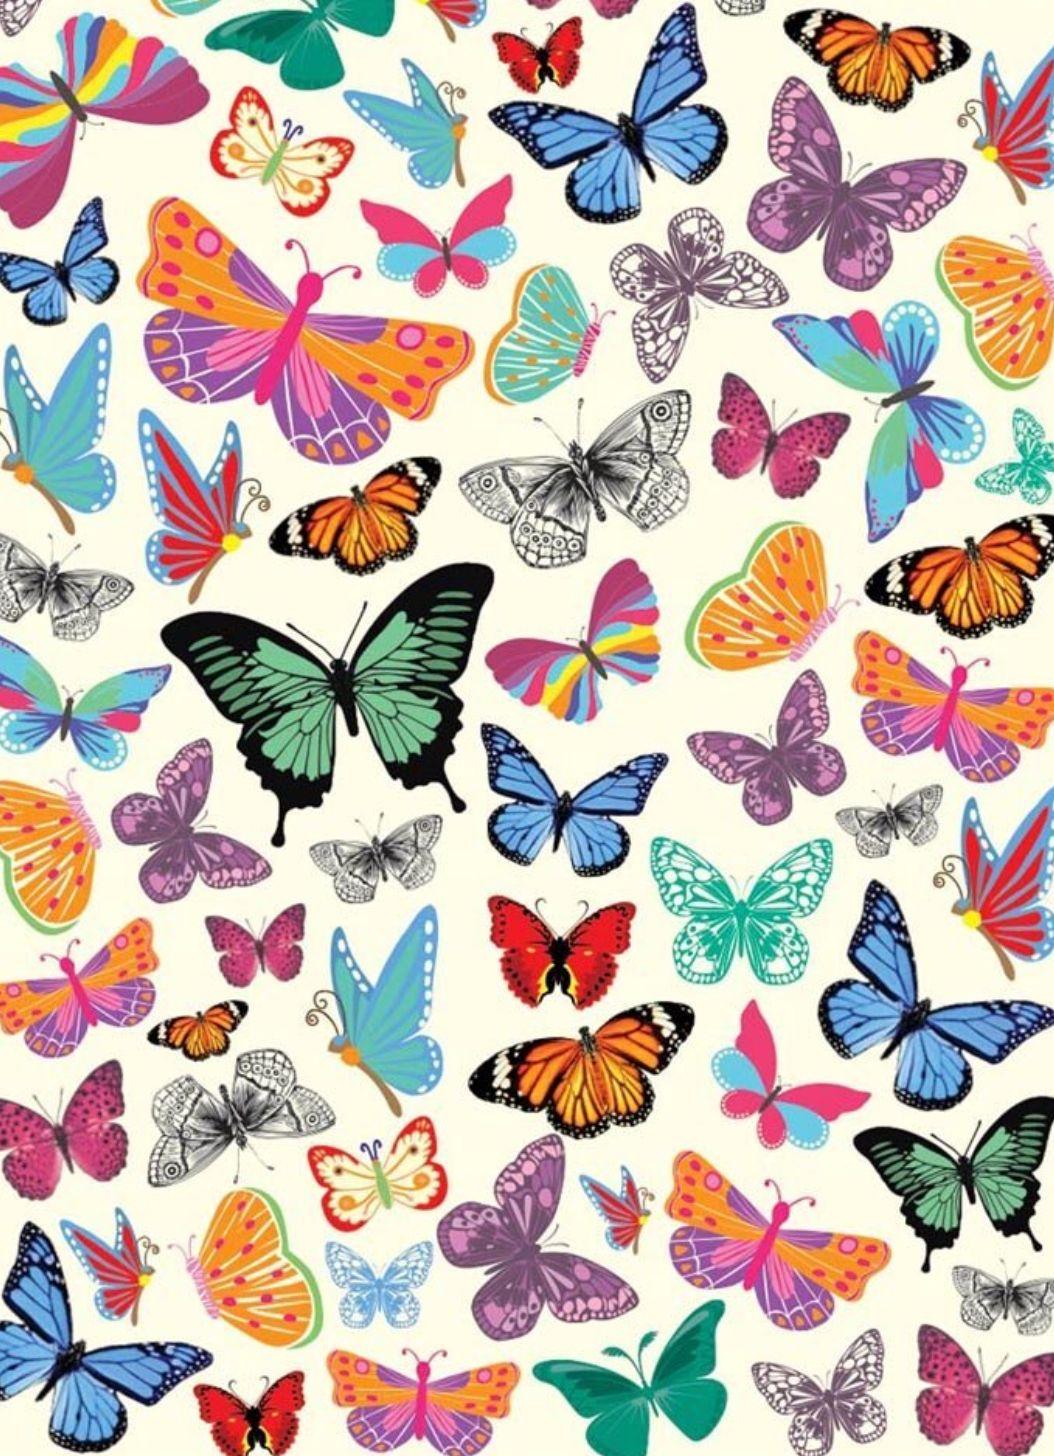 Butterfly Pattern. Art wallpaper, Art collage wall, Picture collage wall